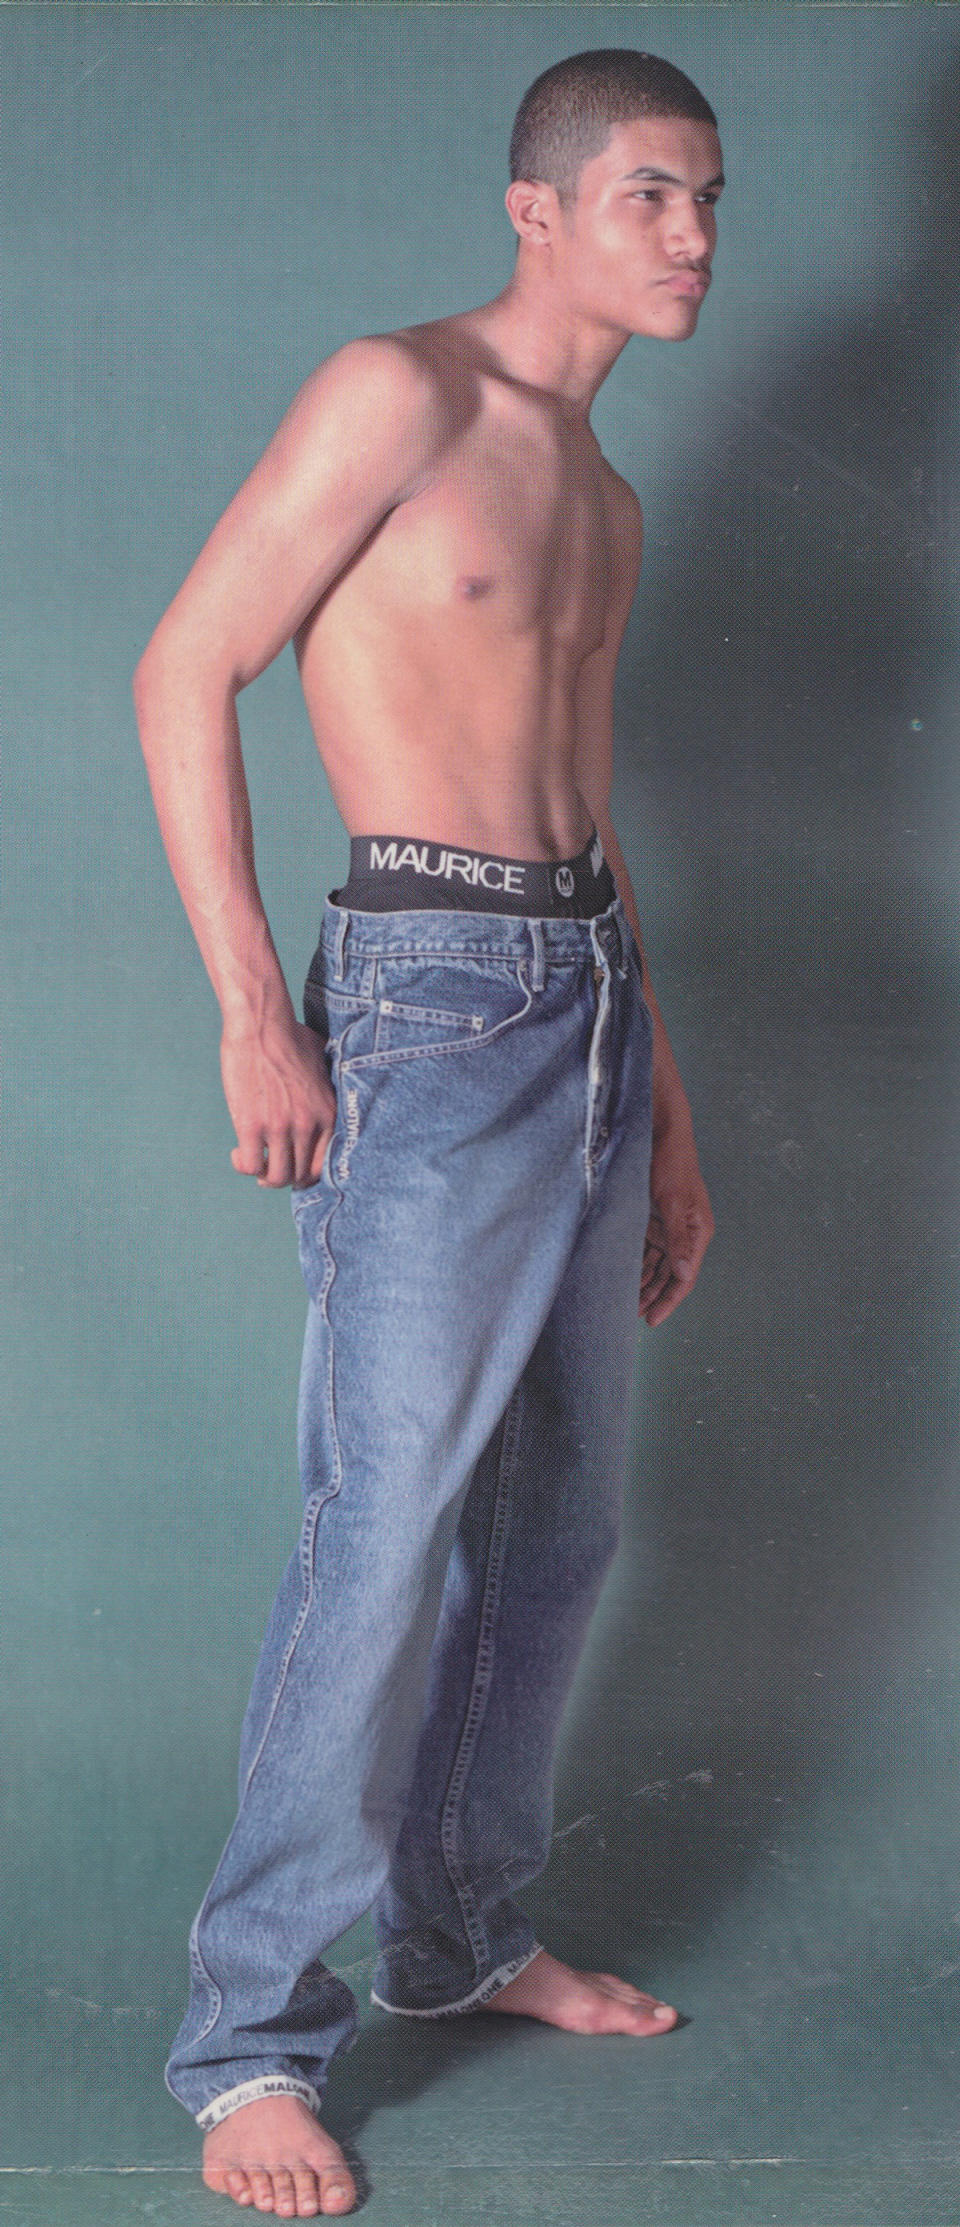 Maurice Malone’s iconic logo cuff jeans in an advertisement from the 1990s, photographed by Malone at his Williamsburg Brooklyn studio.